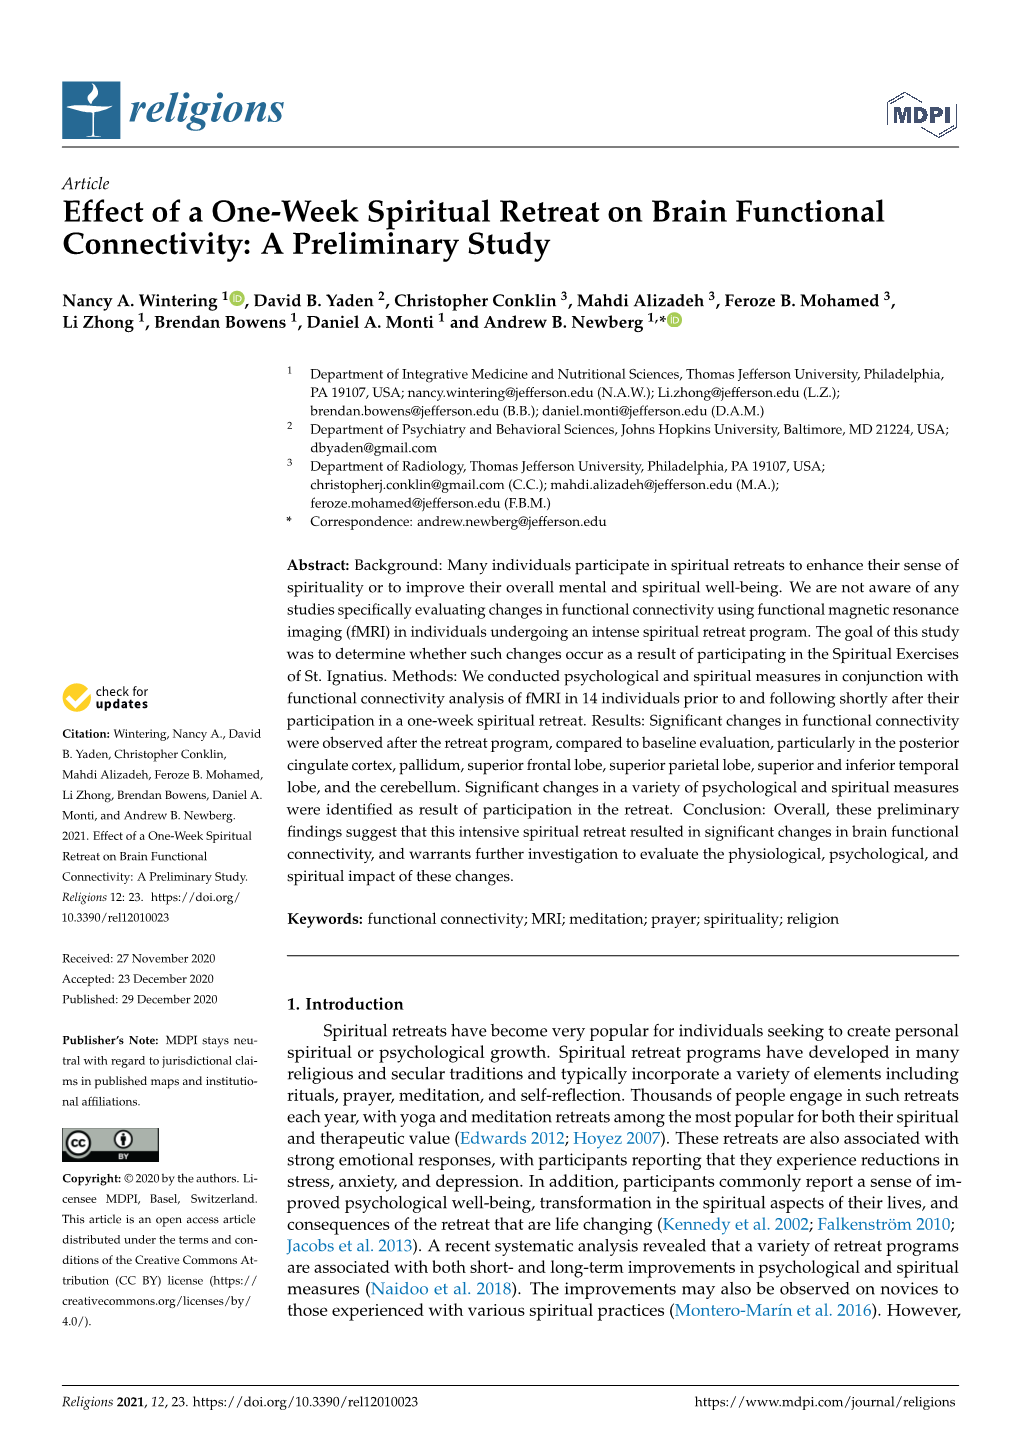 Effect of a One-Week Spiritual Retreat on Brain Functional Connectivity: a Preliminary Study